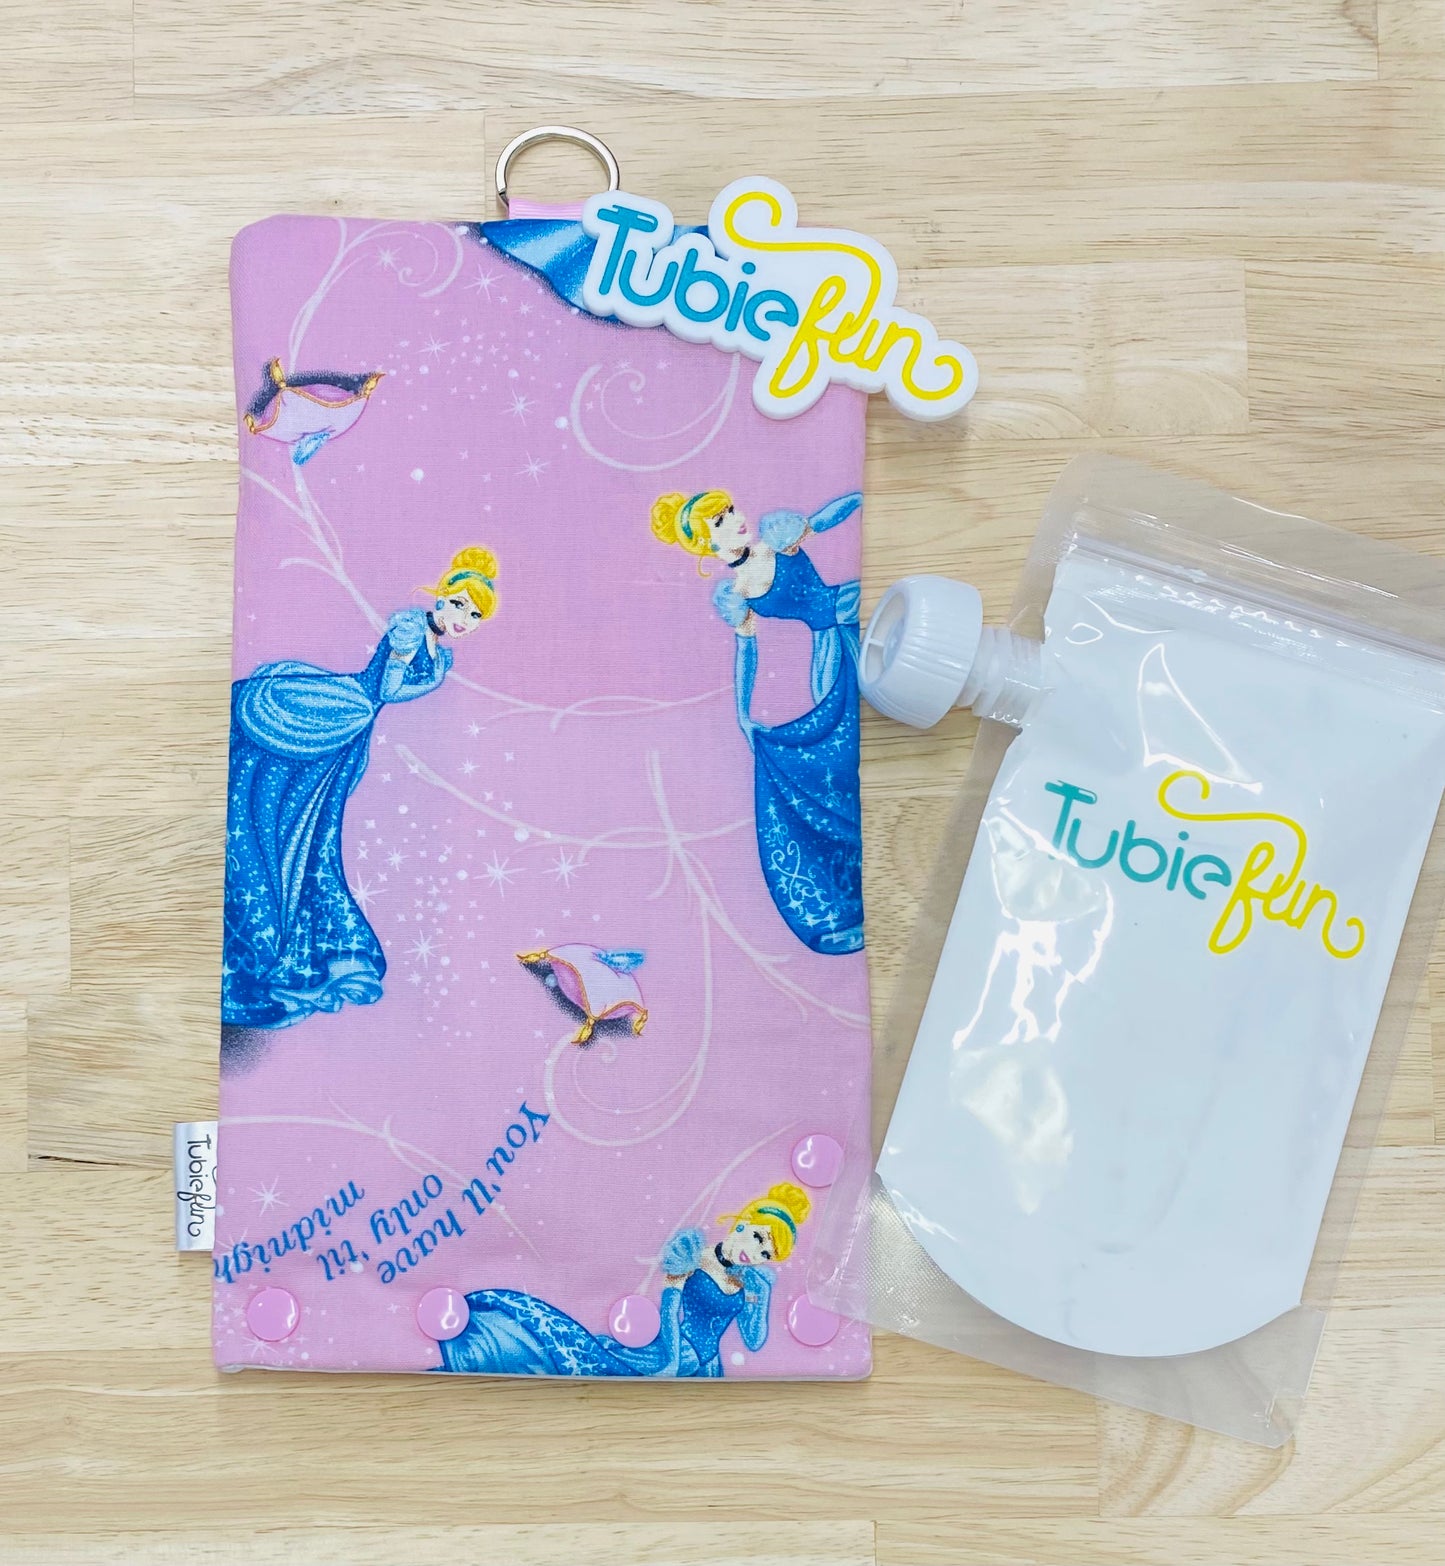 NEW Insulated Milk Bag Suitable for Tubie Fun 500ml Reusable Pouches - Glass Slipper Princess